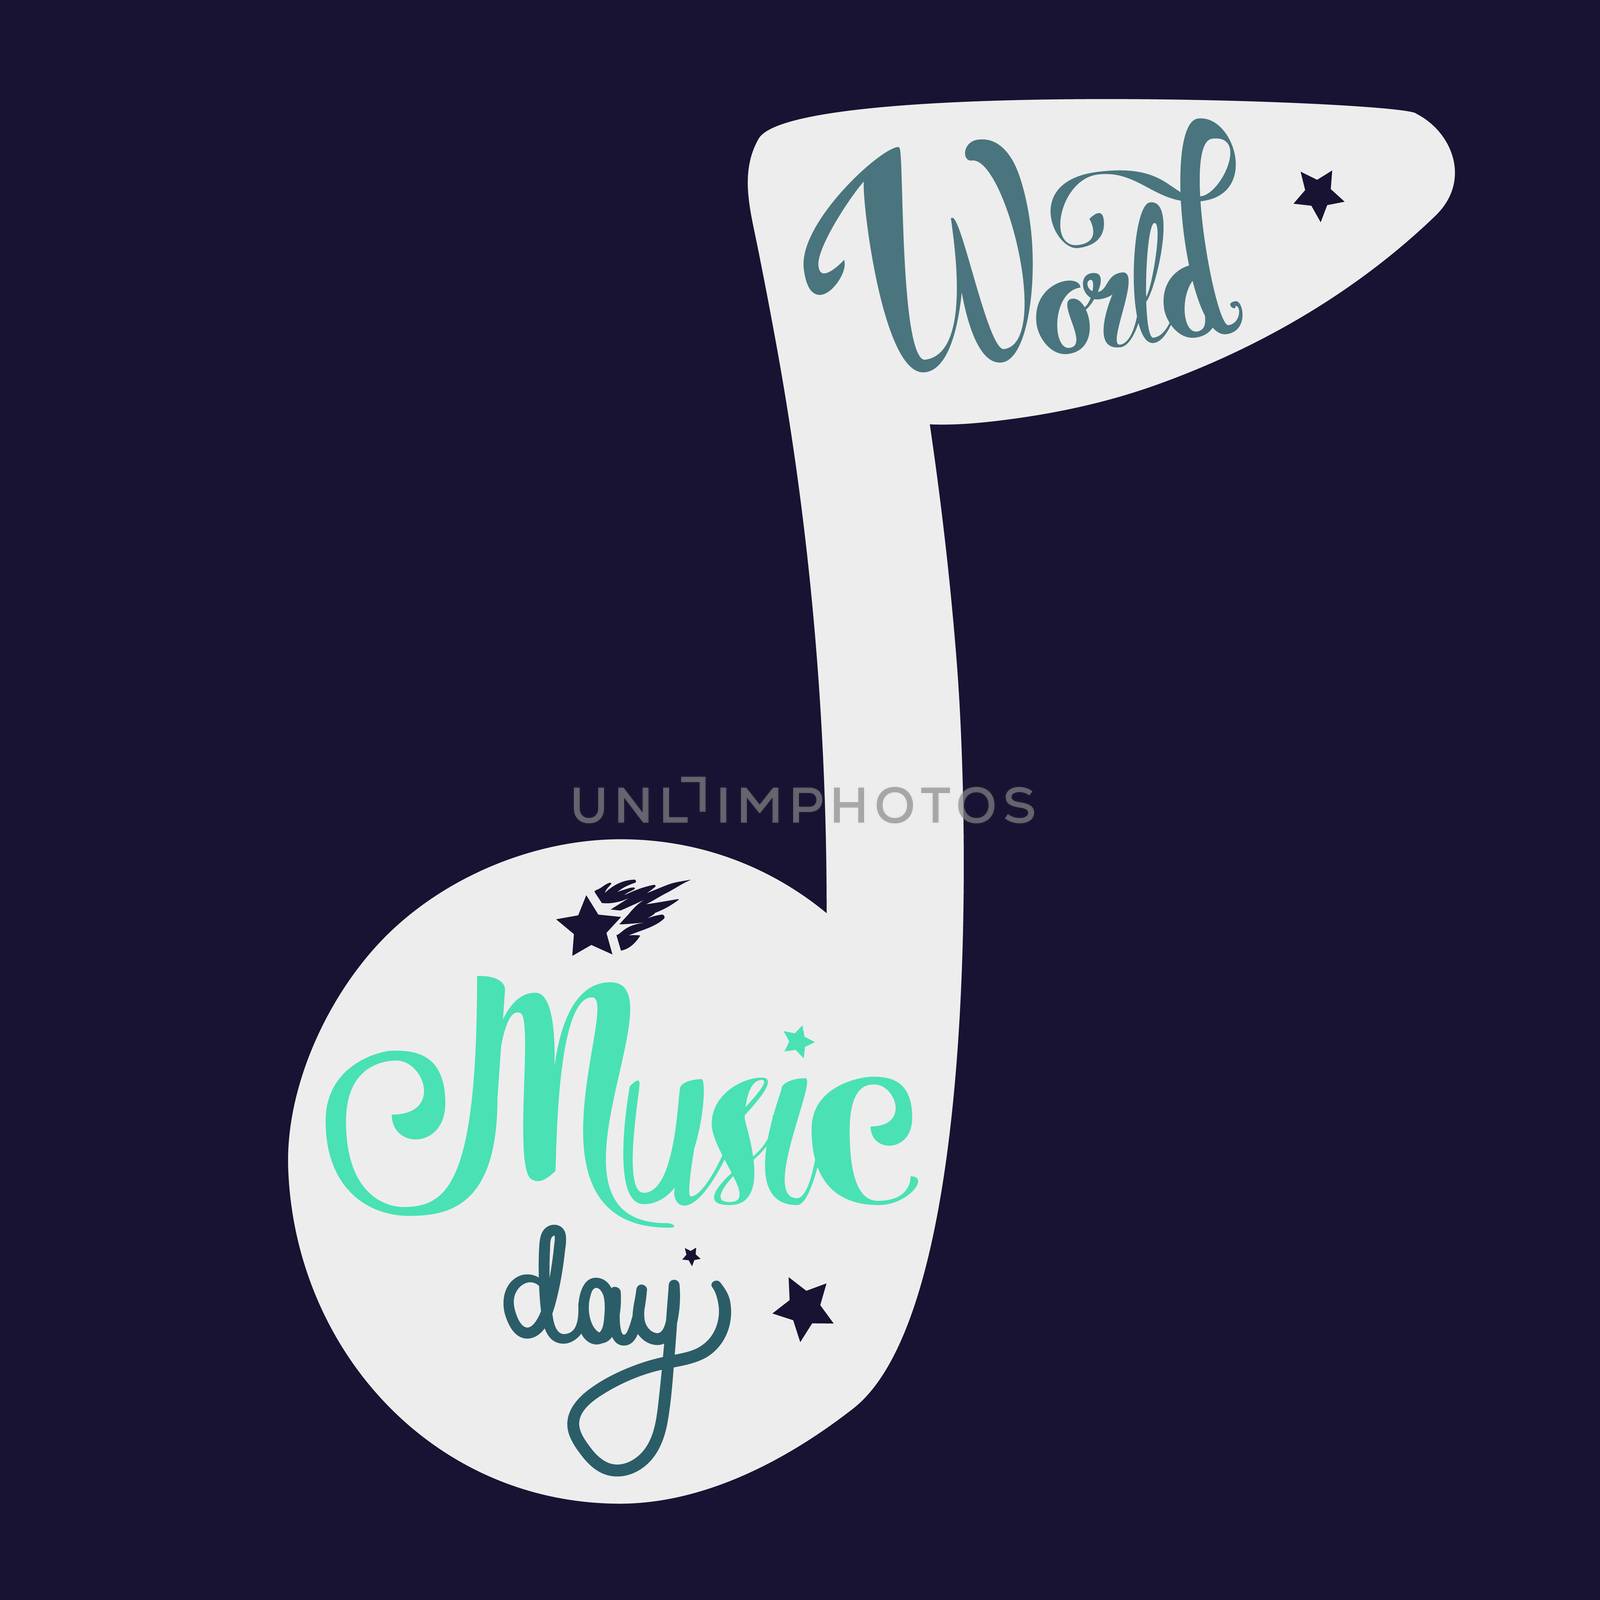 Vintage World Music Day Lettering for Banner and Badge. Sticker, Poster, Card Design Template. Vector